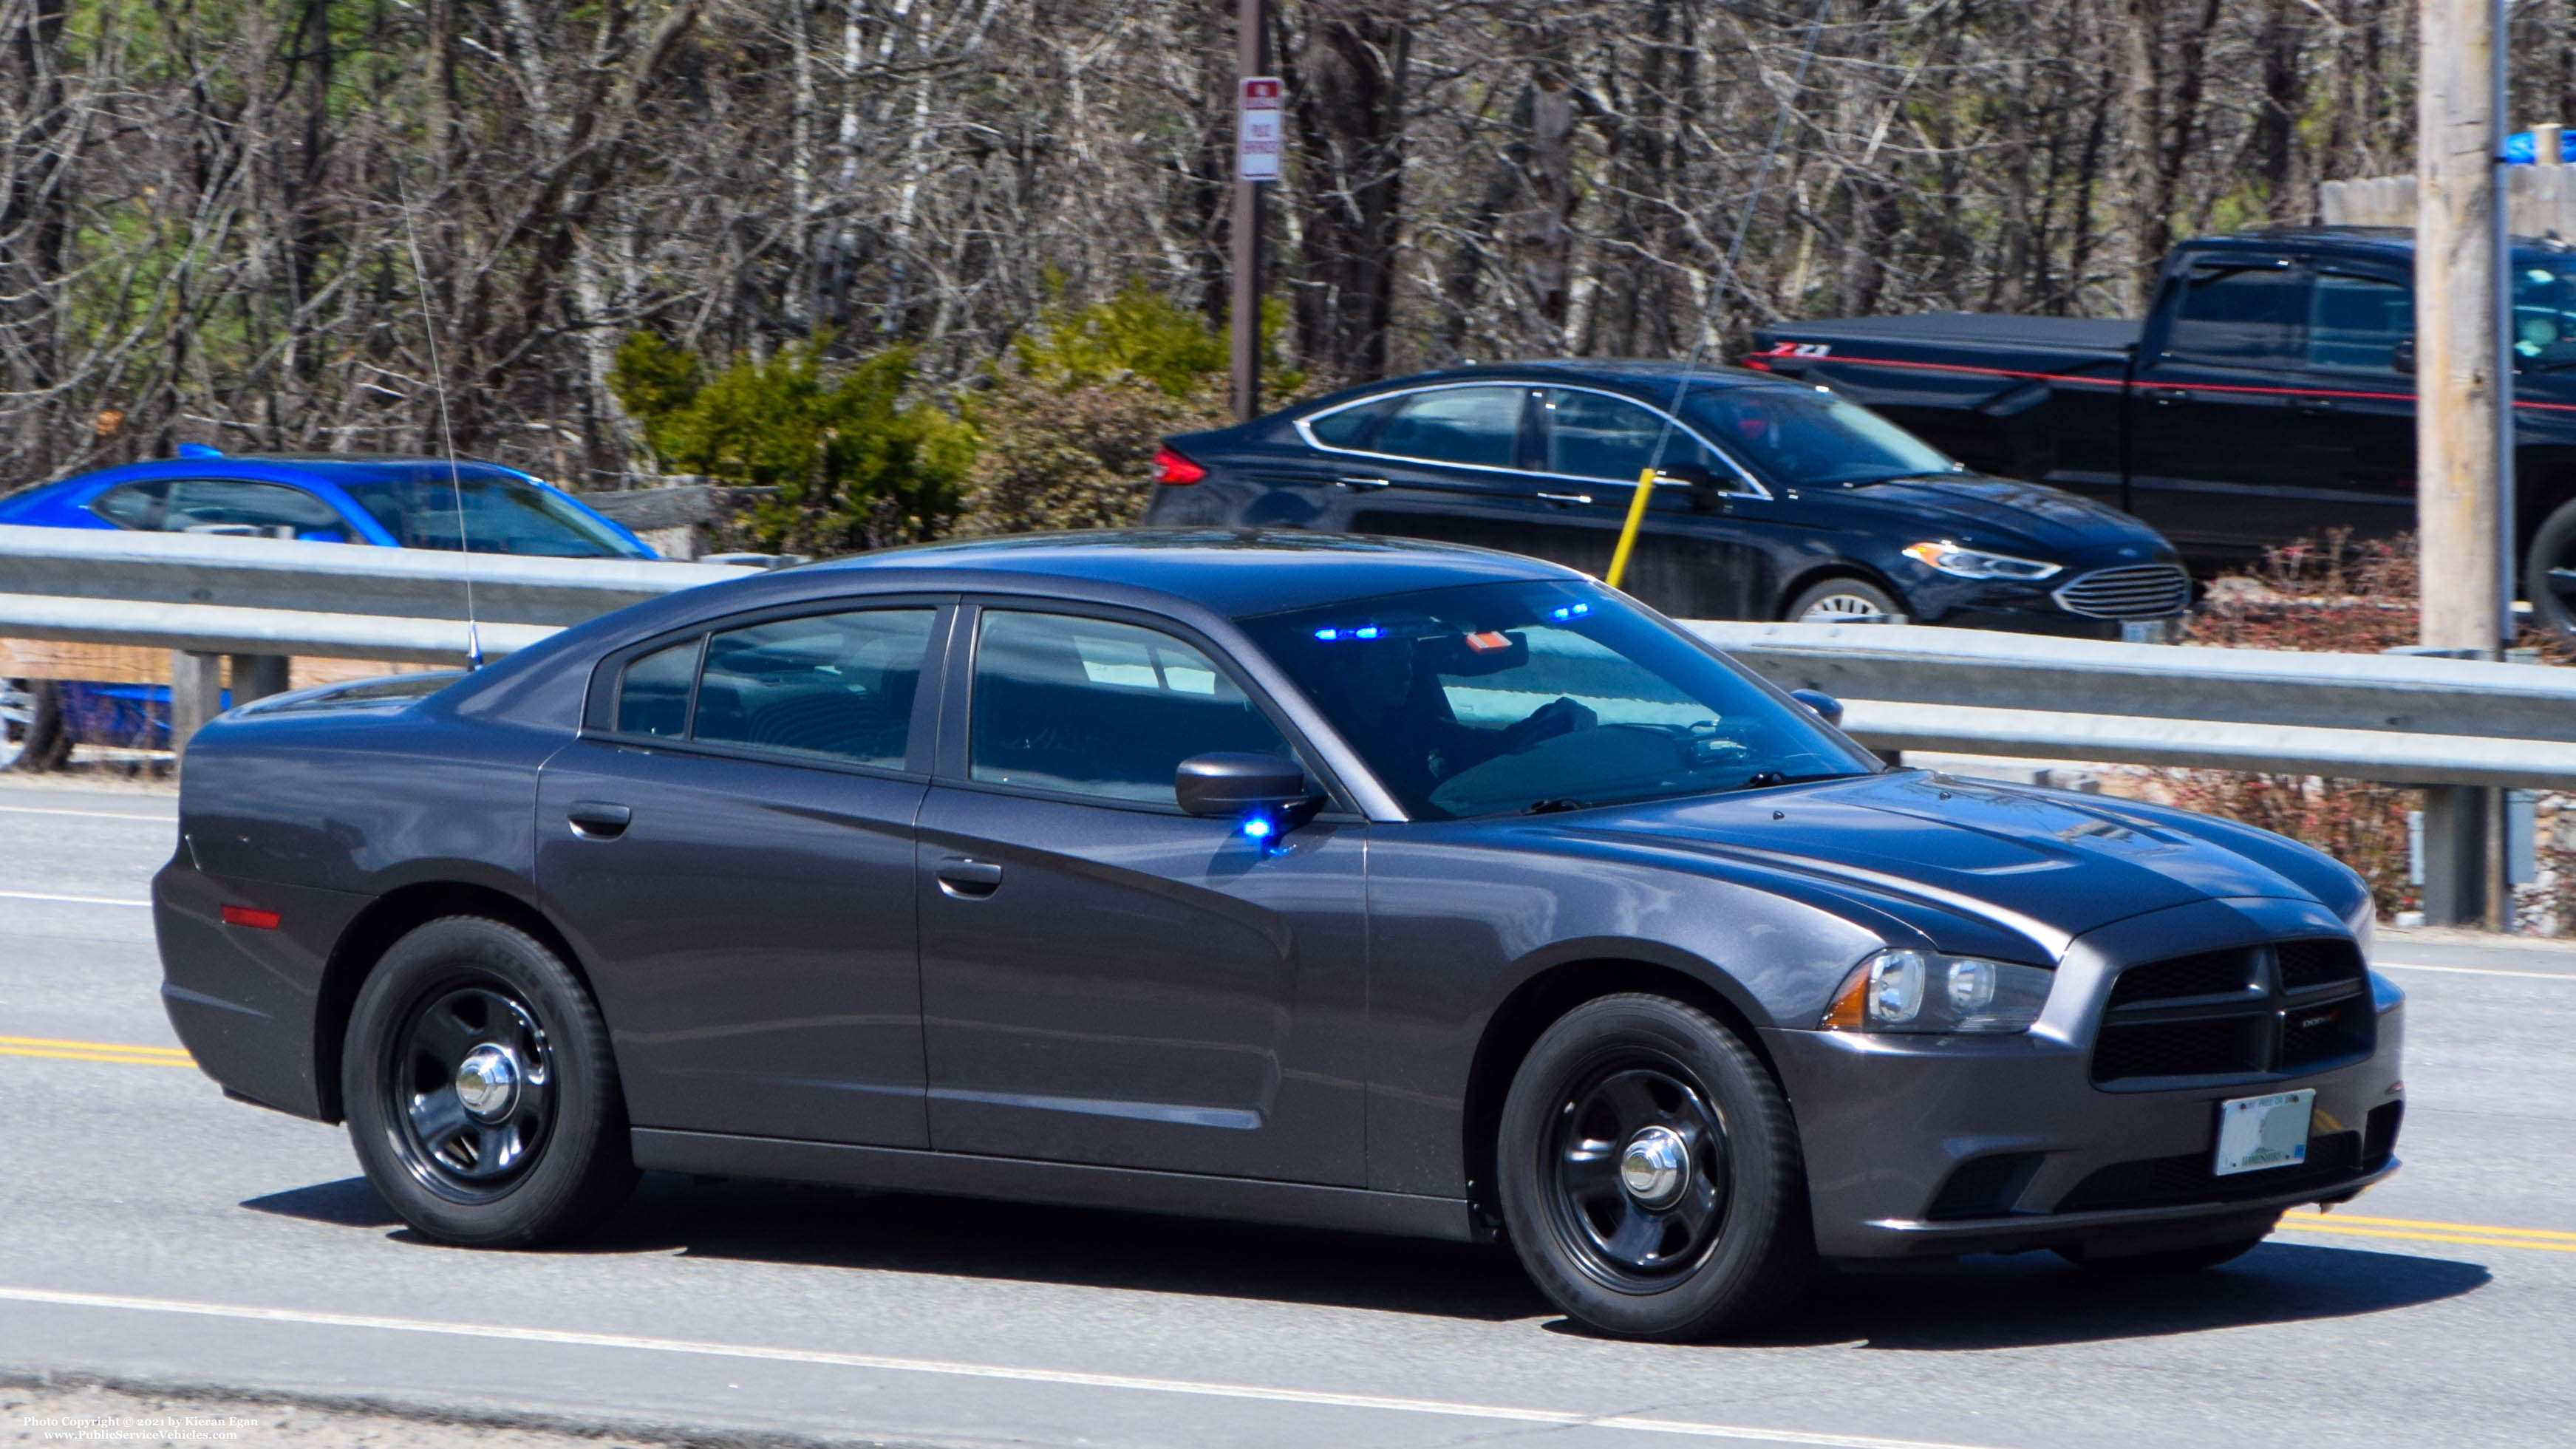 A photo  of New Hampshire State Police
            Unmarked Unit, a 2011-2014 Dodge Charger             taken by Kieran Egan